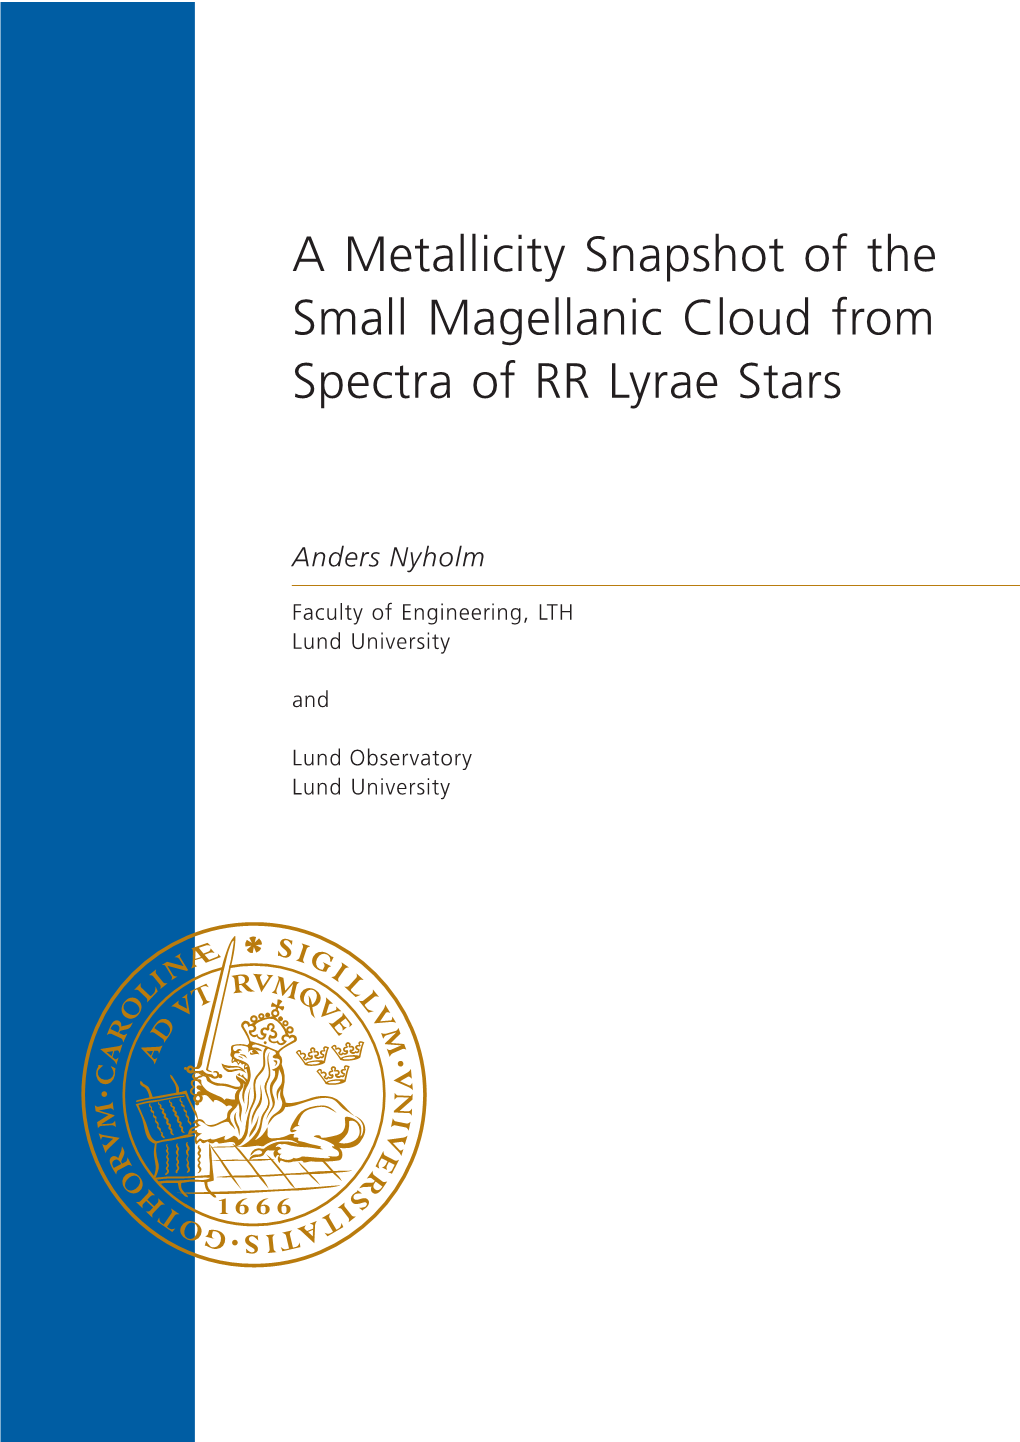 A Metallicity Snapshot of the Small Magellanic Cloud from Spectra of RR Lyrae Stars